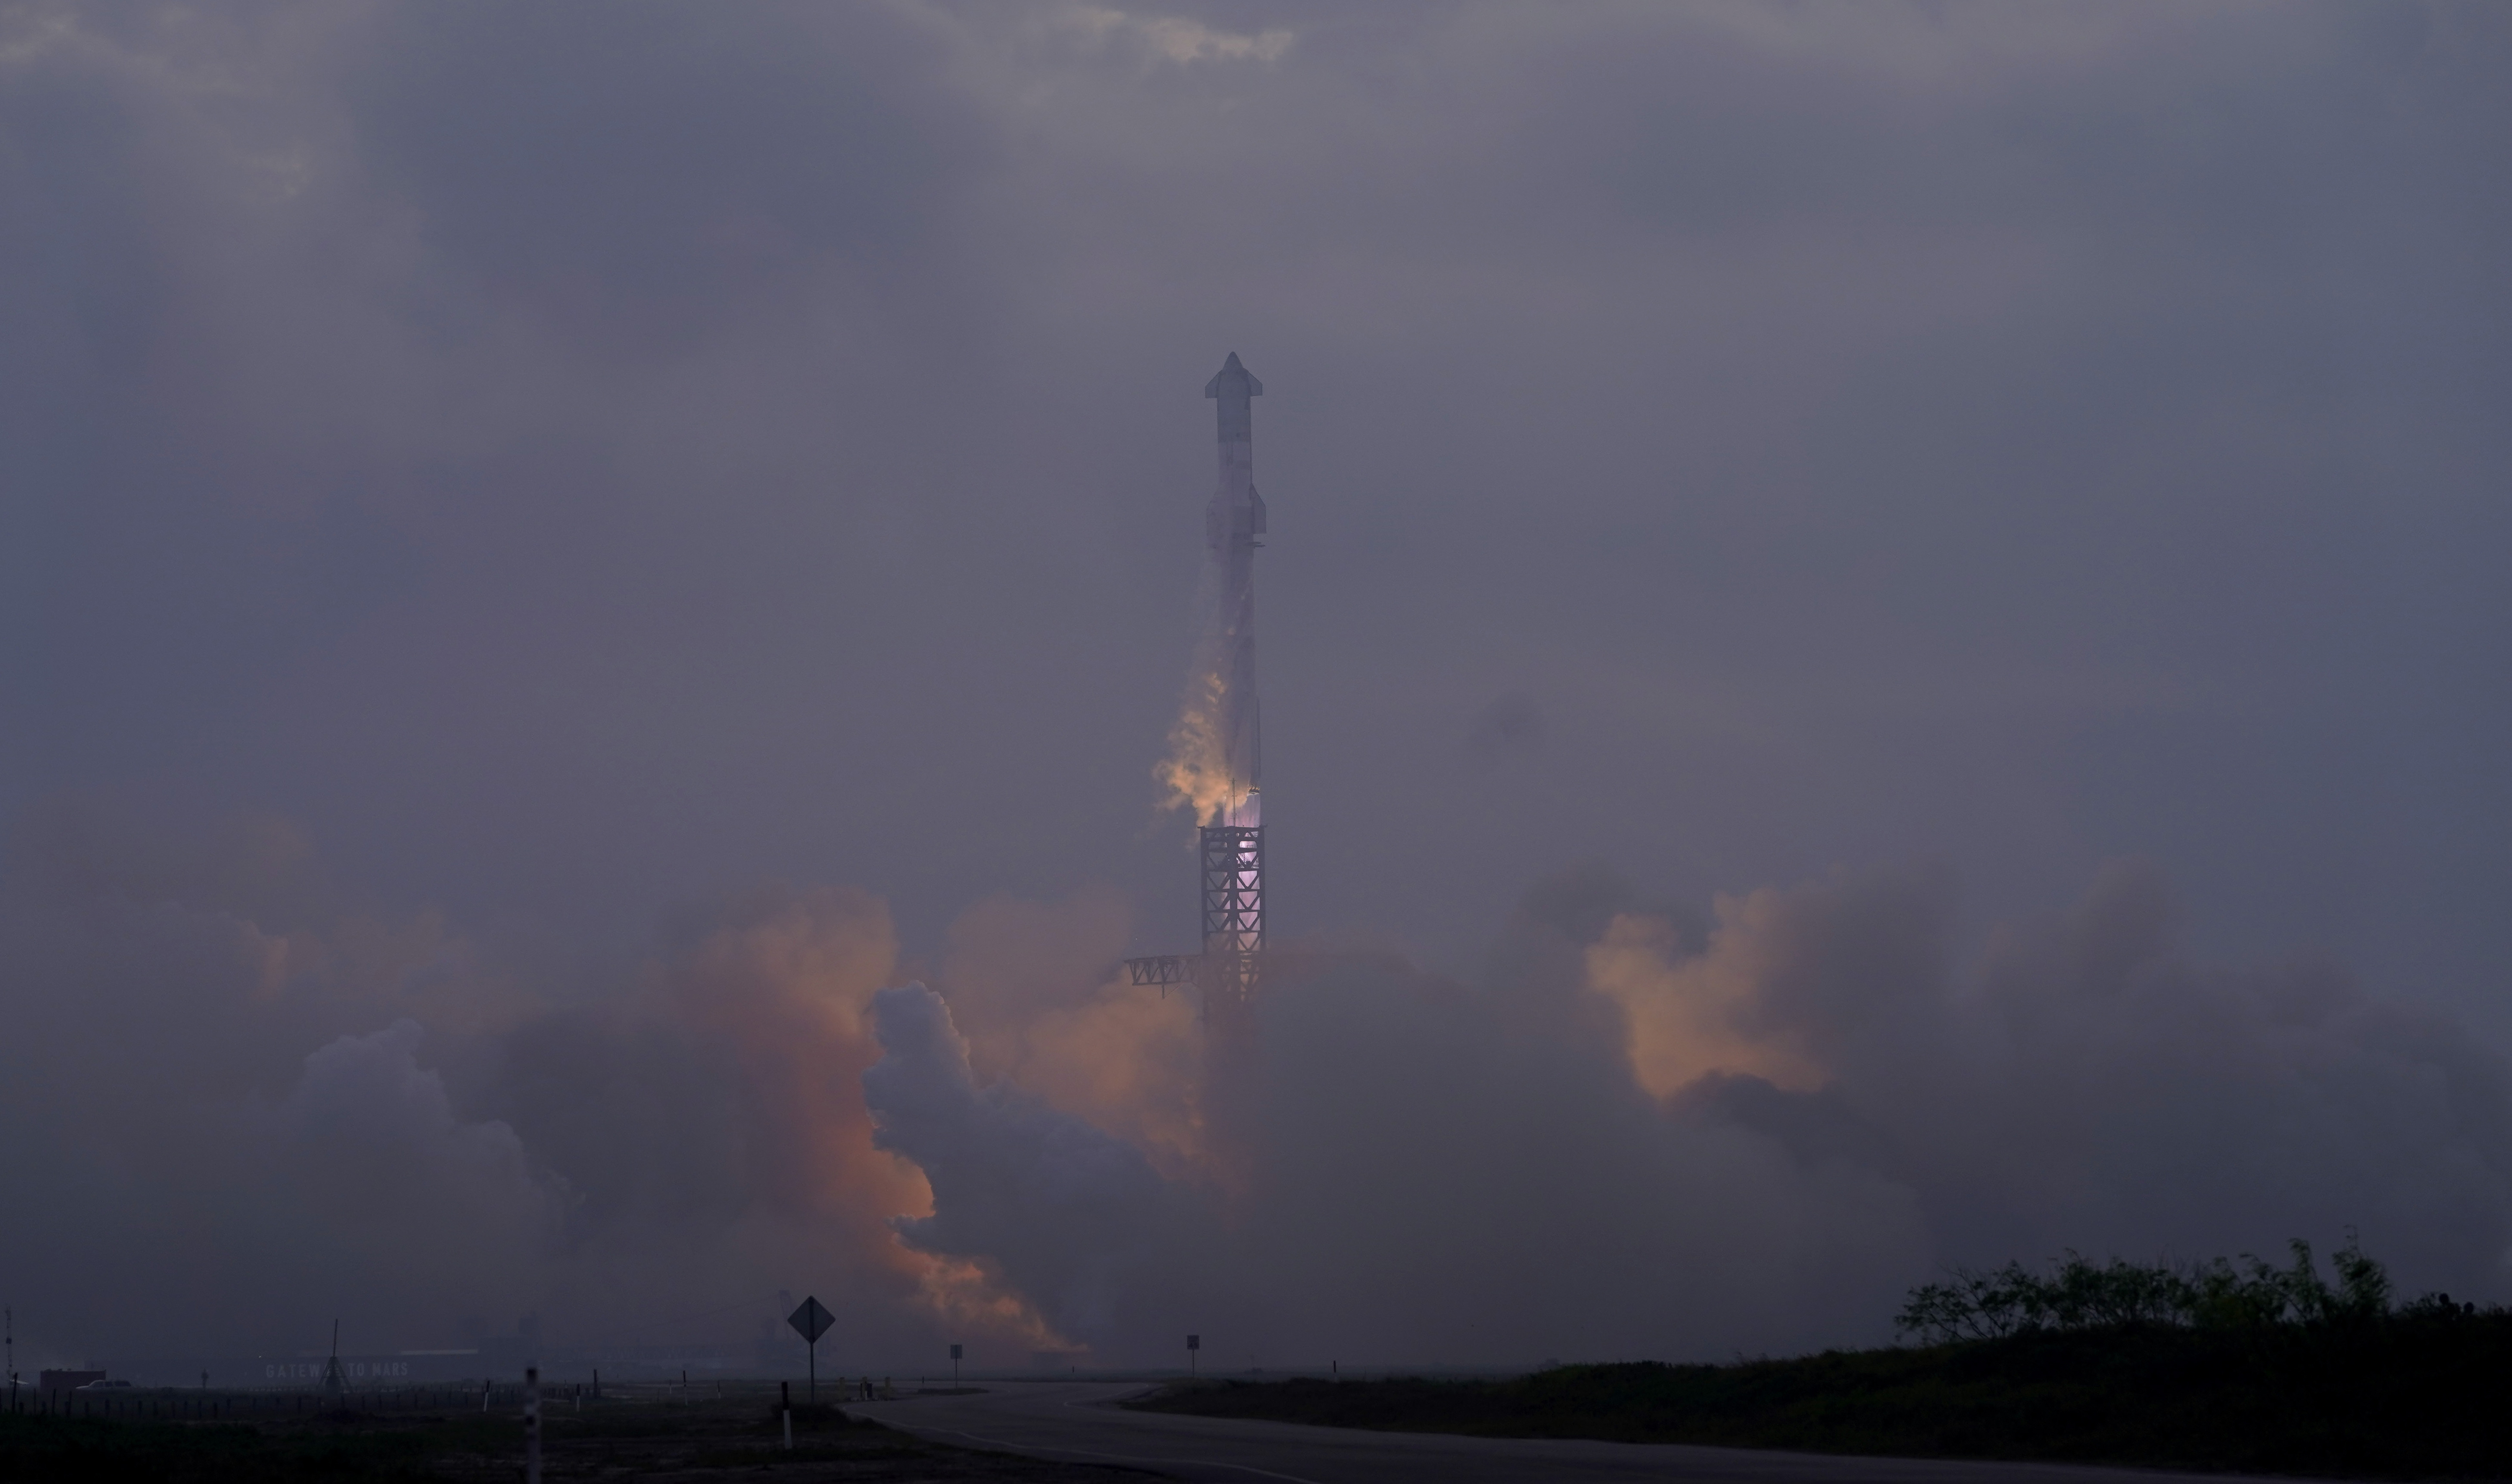 SpaceX's mega rocket Starship launches at dawn in the haze on it's third test flight from Starbase in Boca Chica, Texas